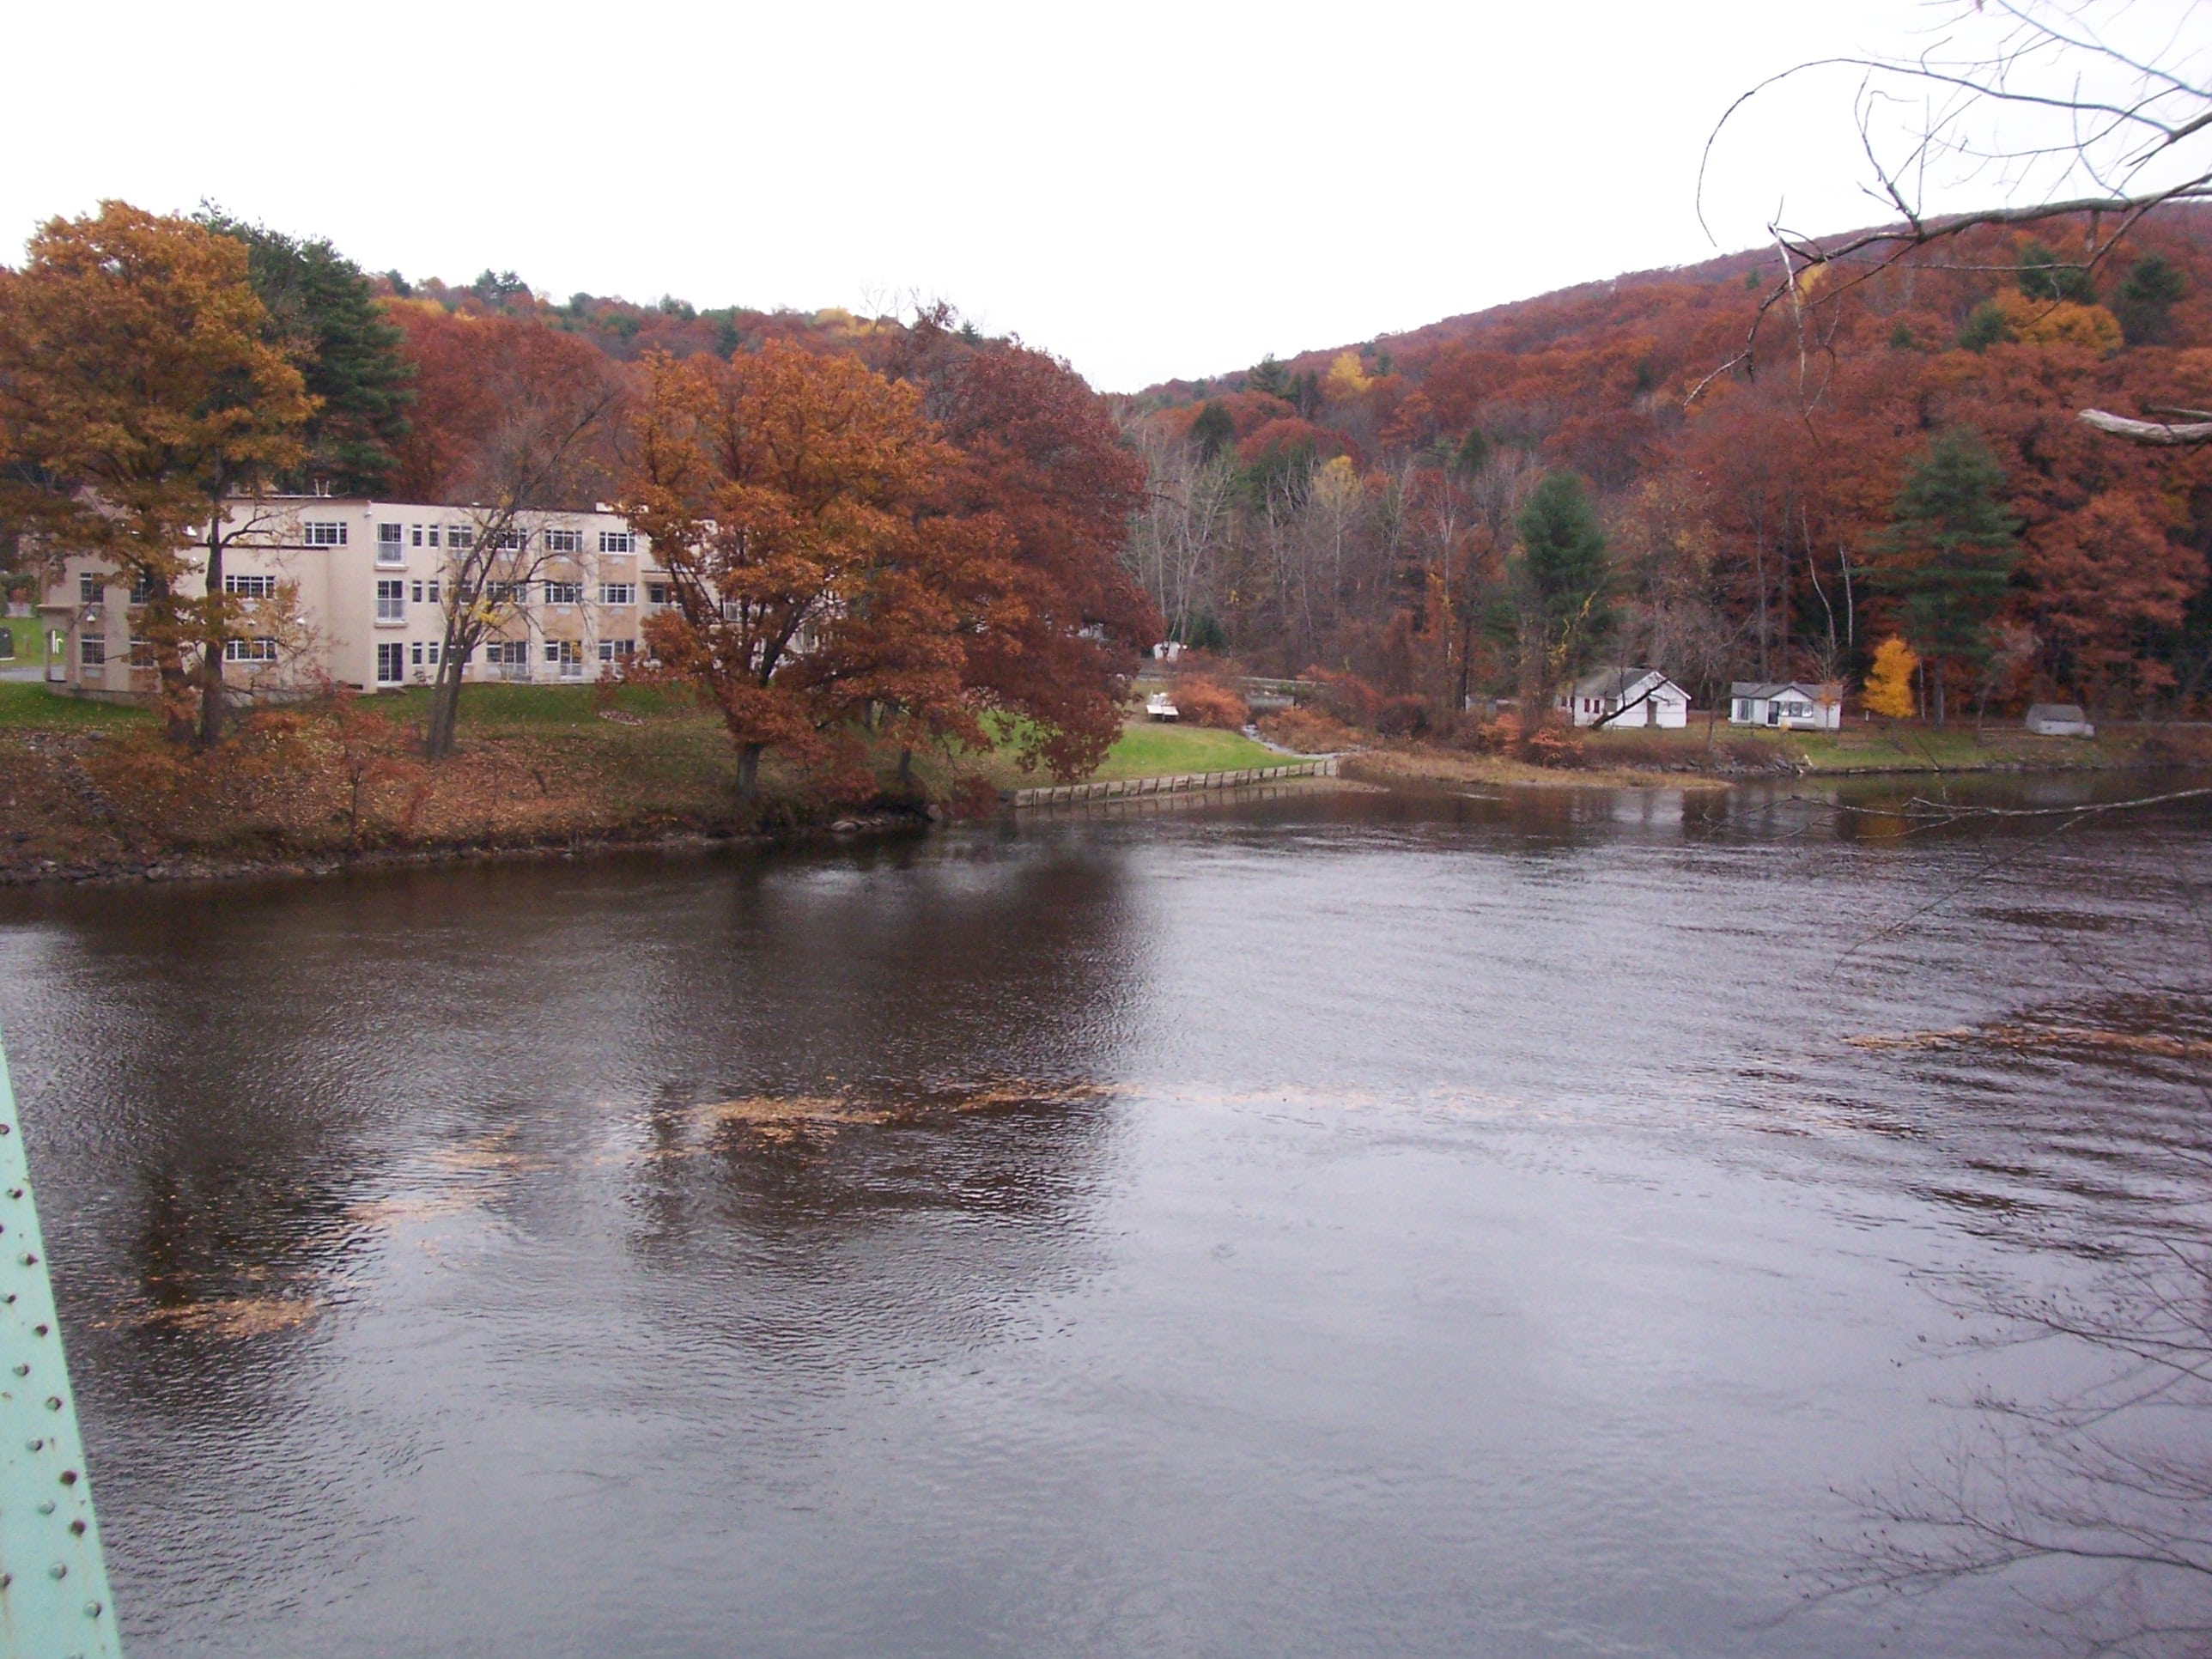 view of river and trees with orange and red leaves